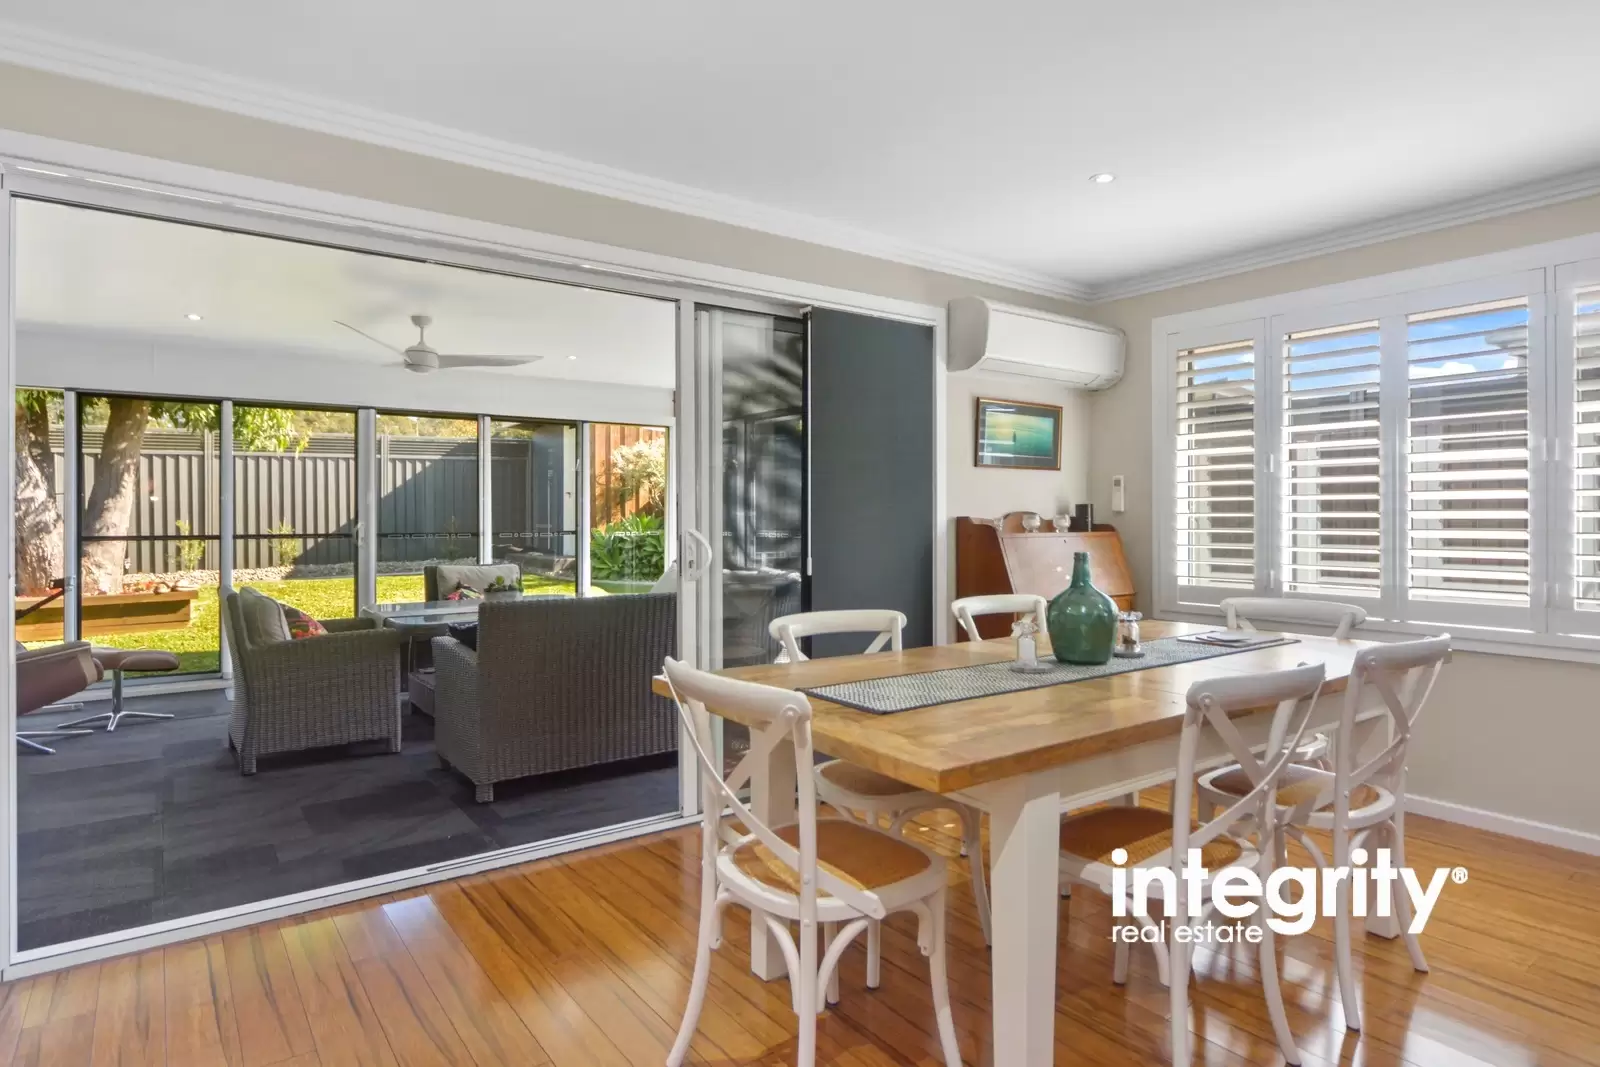 11 Trawler Street, Vincentia Sold by Integrity Real Estate - image 6